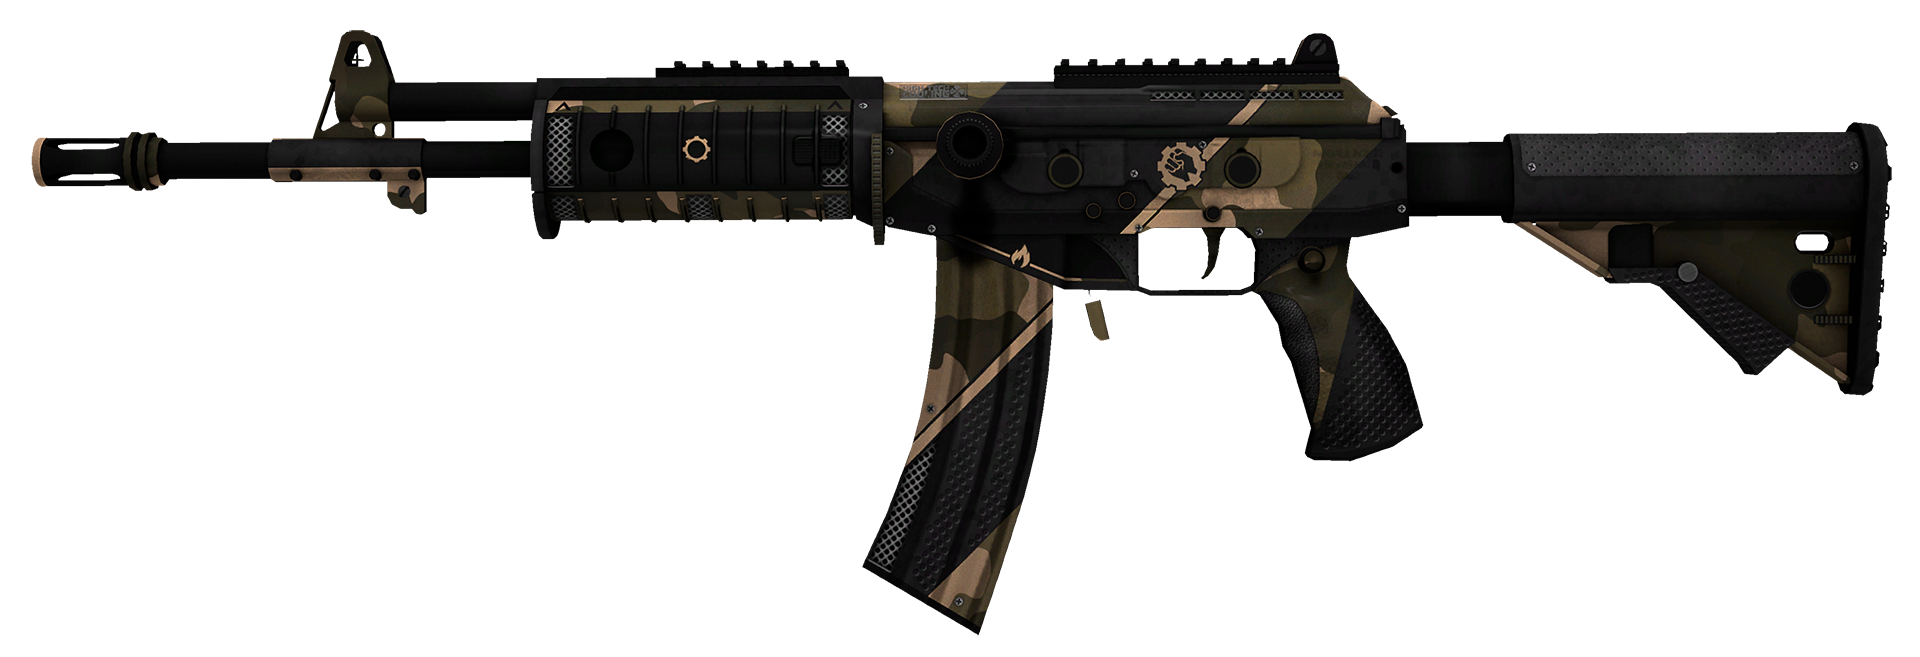 G3SG1 Black Sand cs go skin download the new for ios